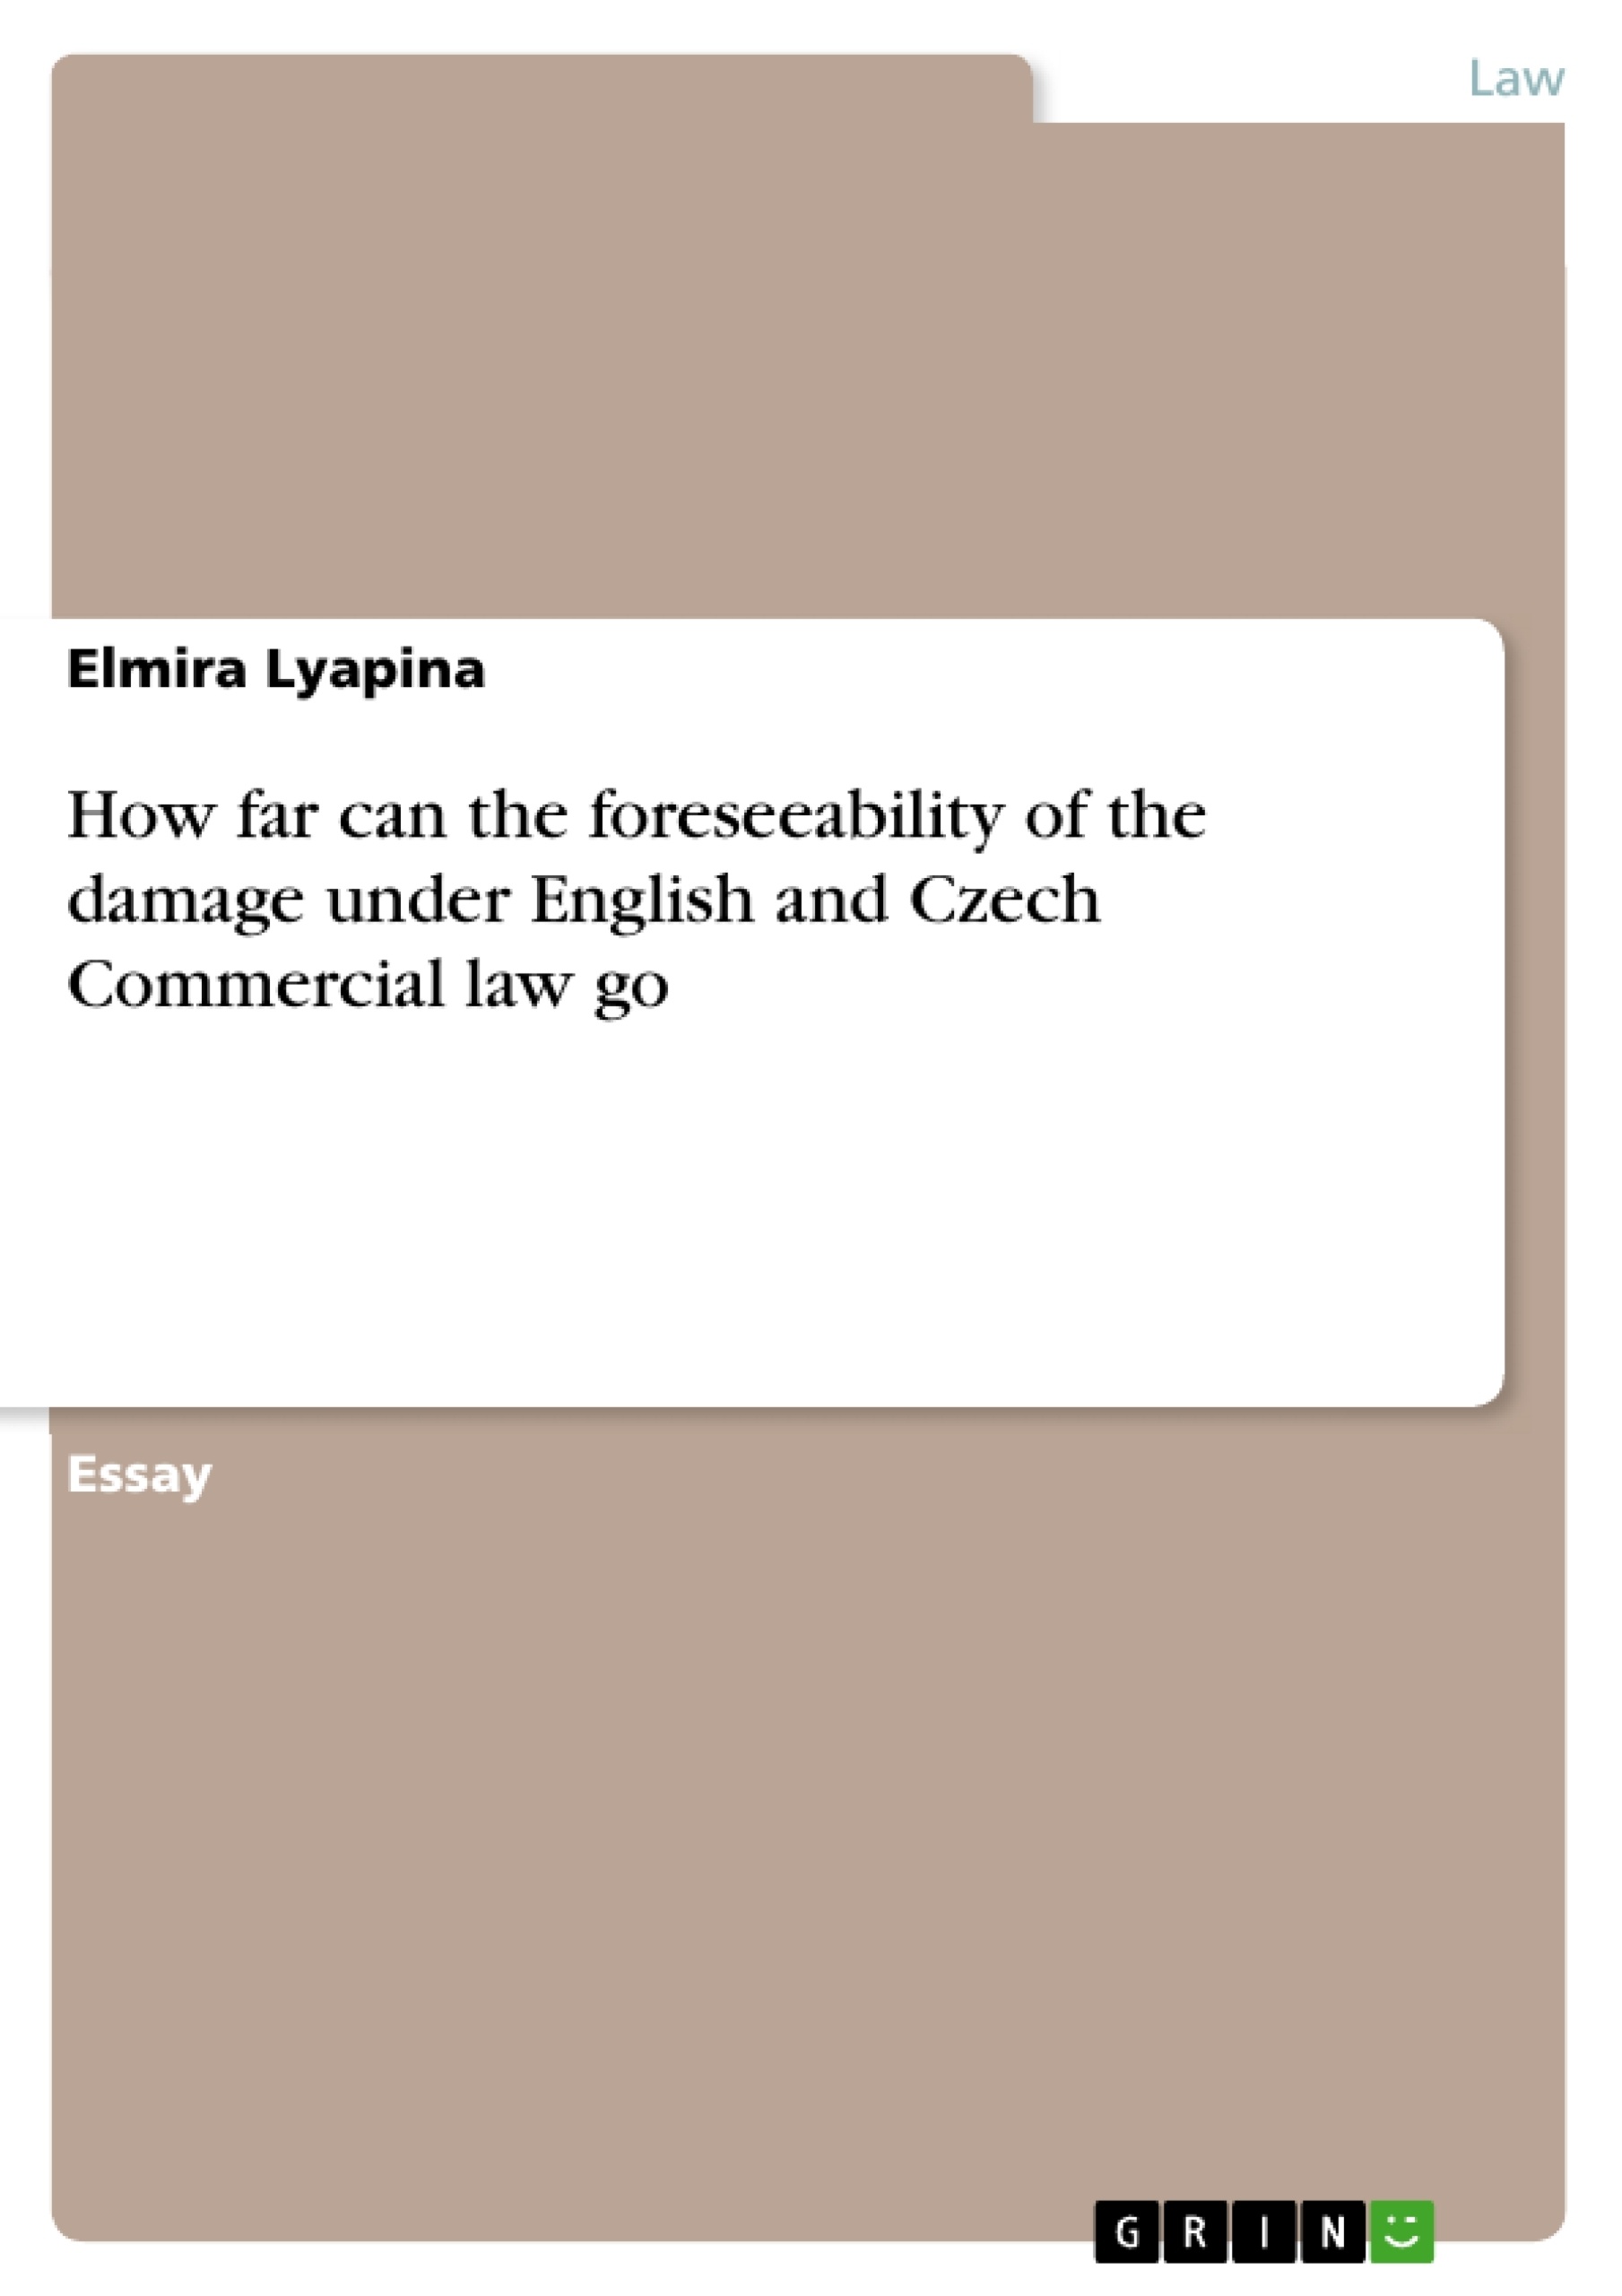 Título: How far can the foreseeability of the damage under English and Czech Commercial law go